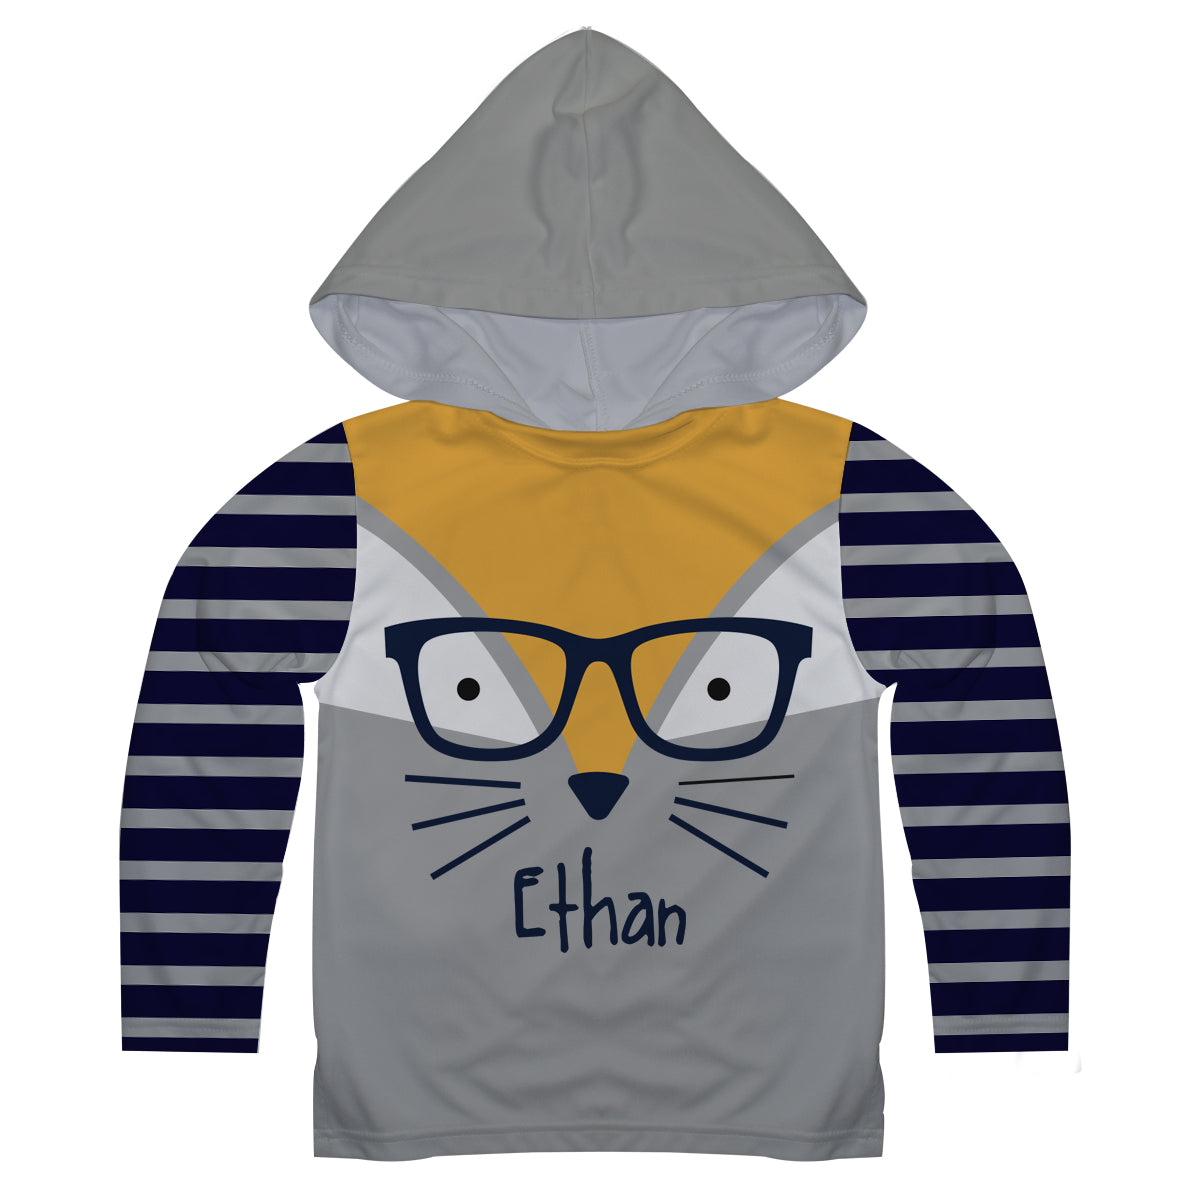 Boys gray and orange fox face long sleeve hooded tee shirt with name - Wimziy&Co.